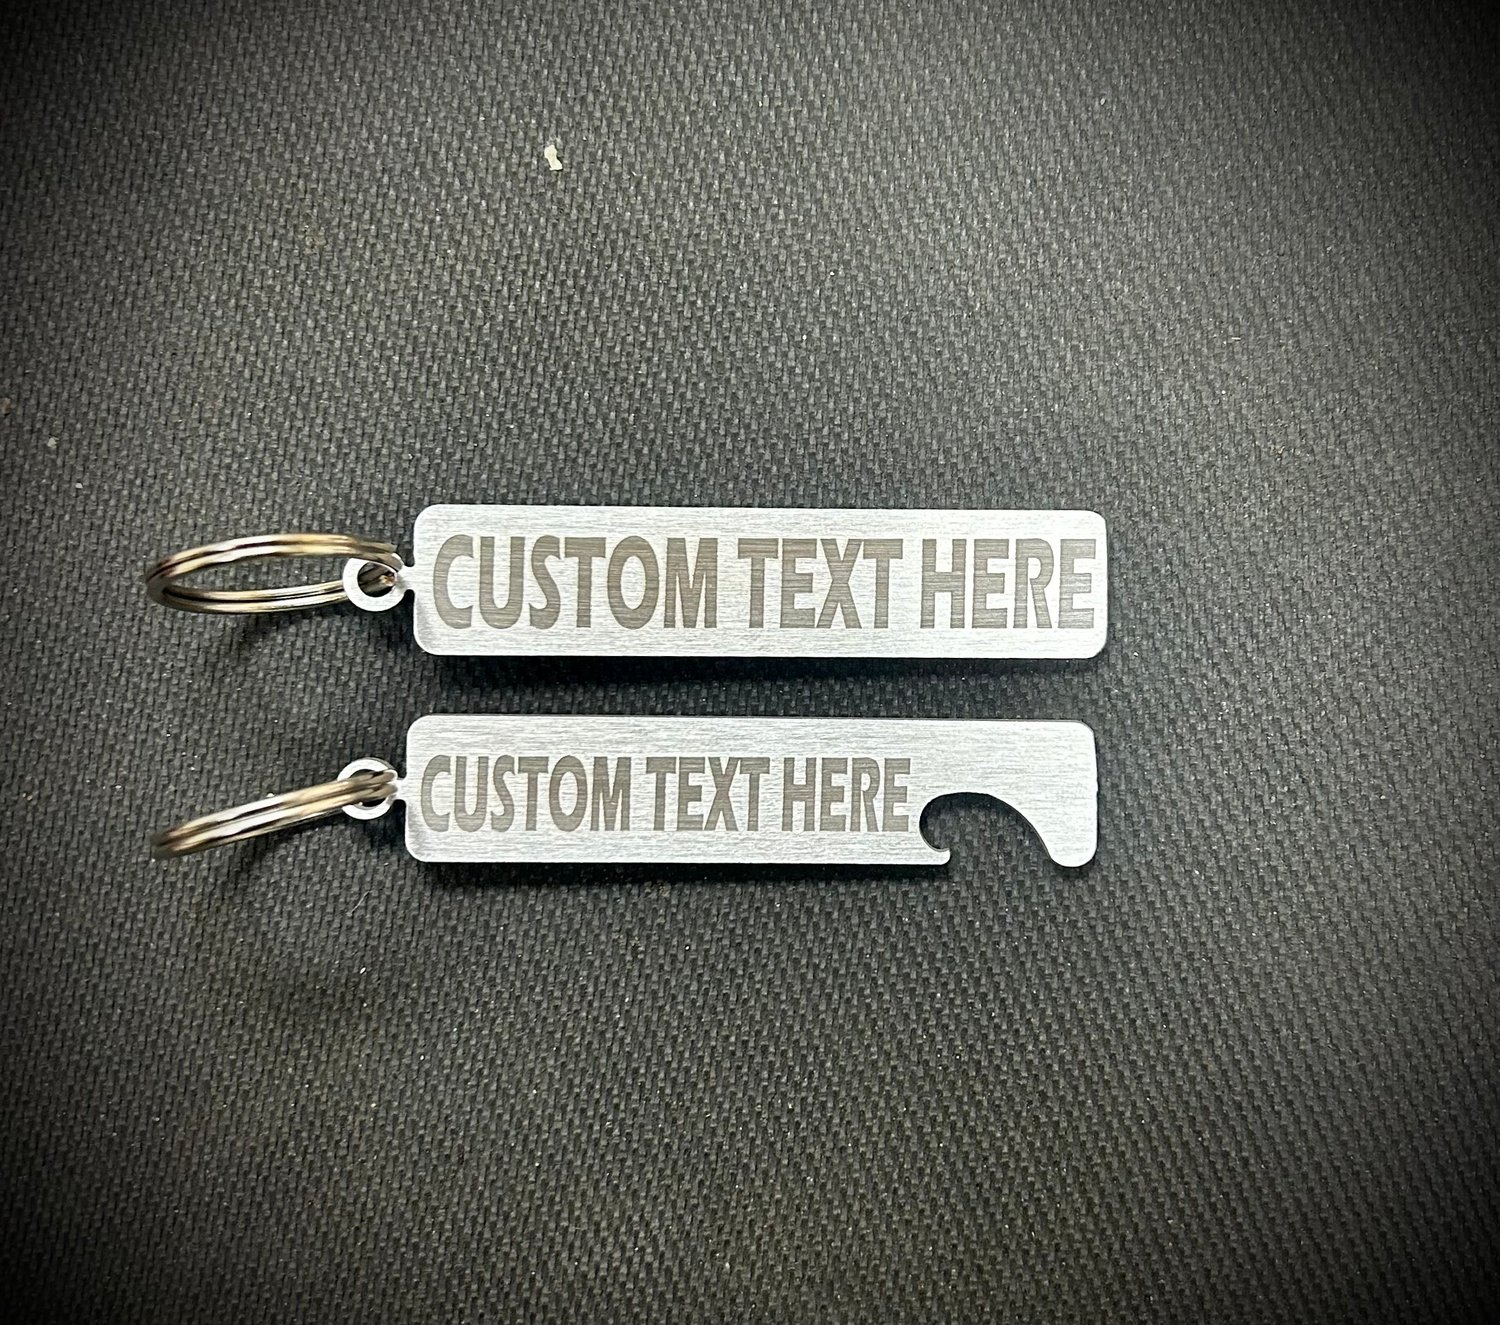 Custom Text keychain LASER ENGRAVED (not cut through like our regular keychains) 